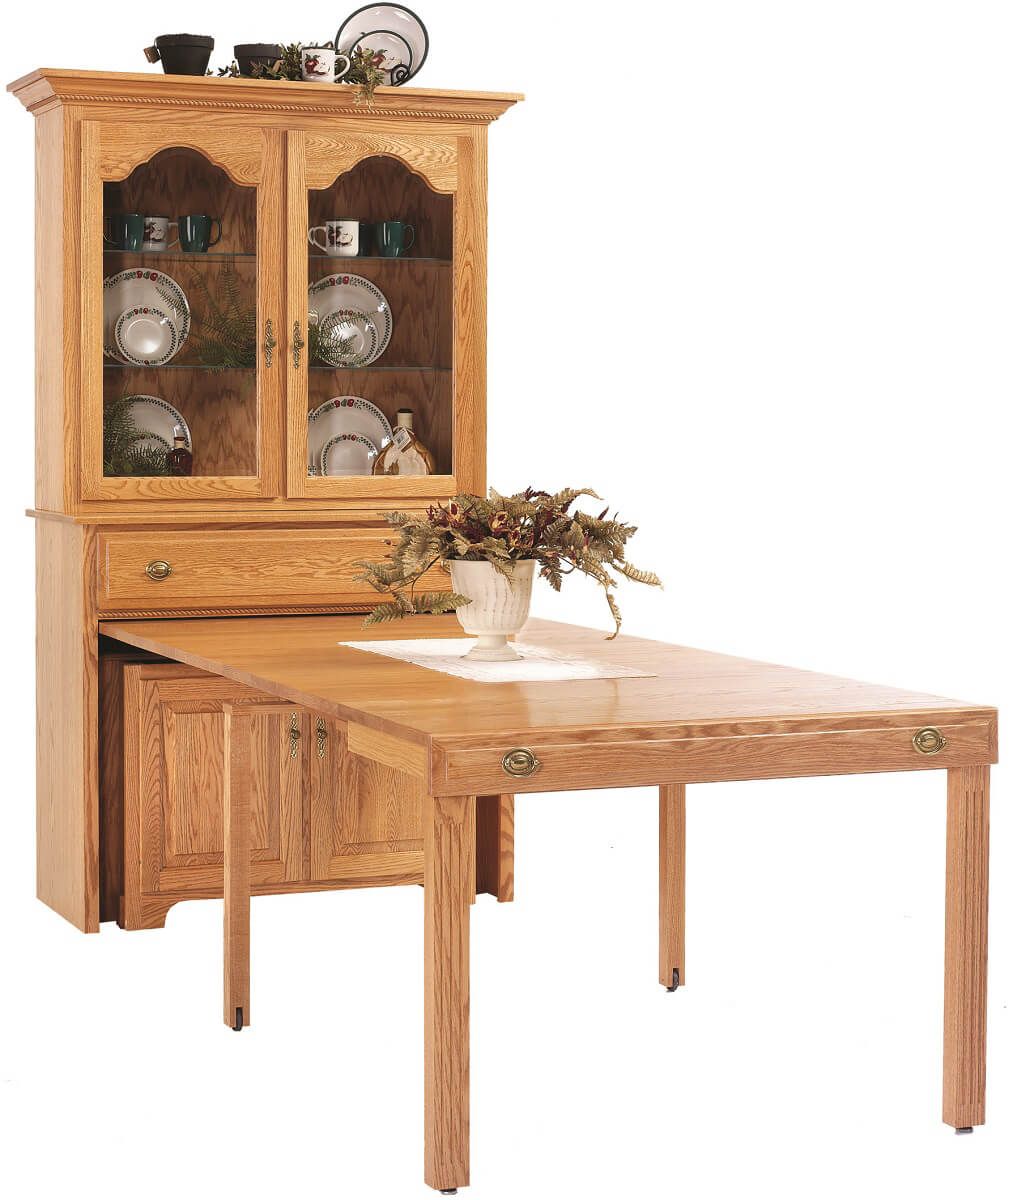 Oak Console Table with Pullout Table
 
